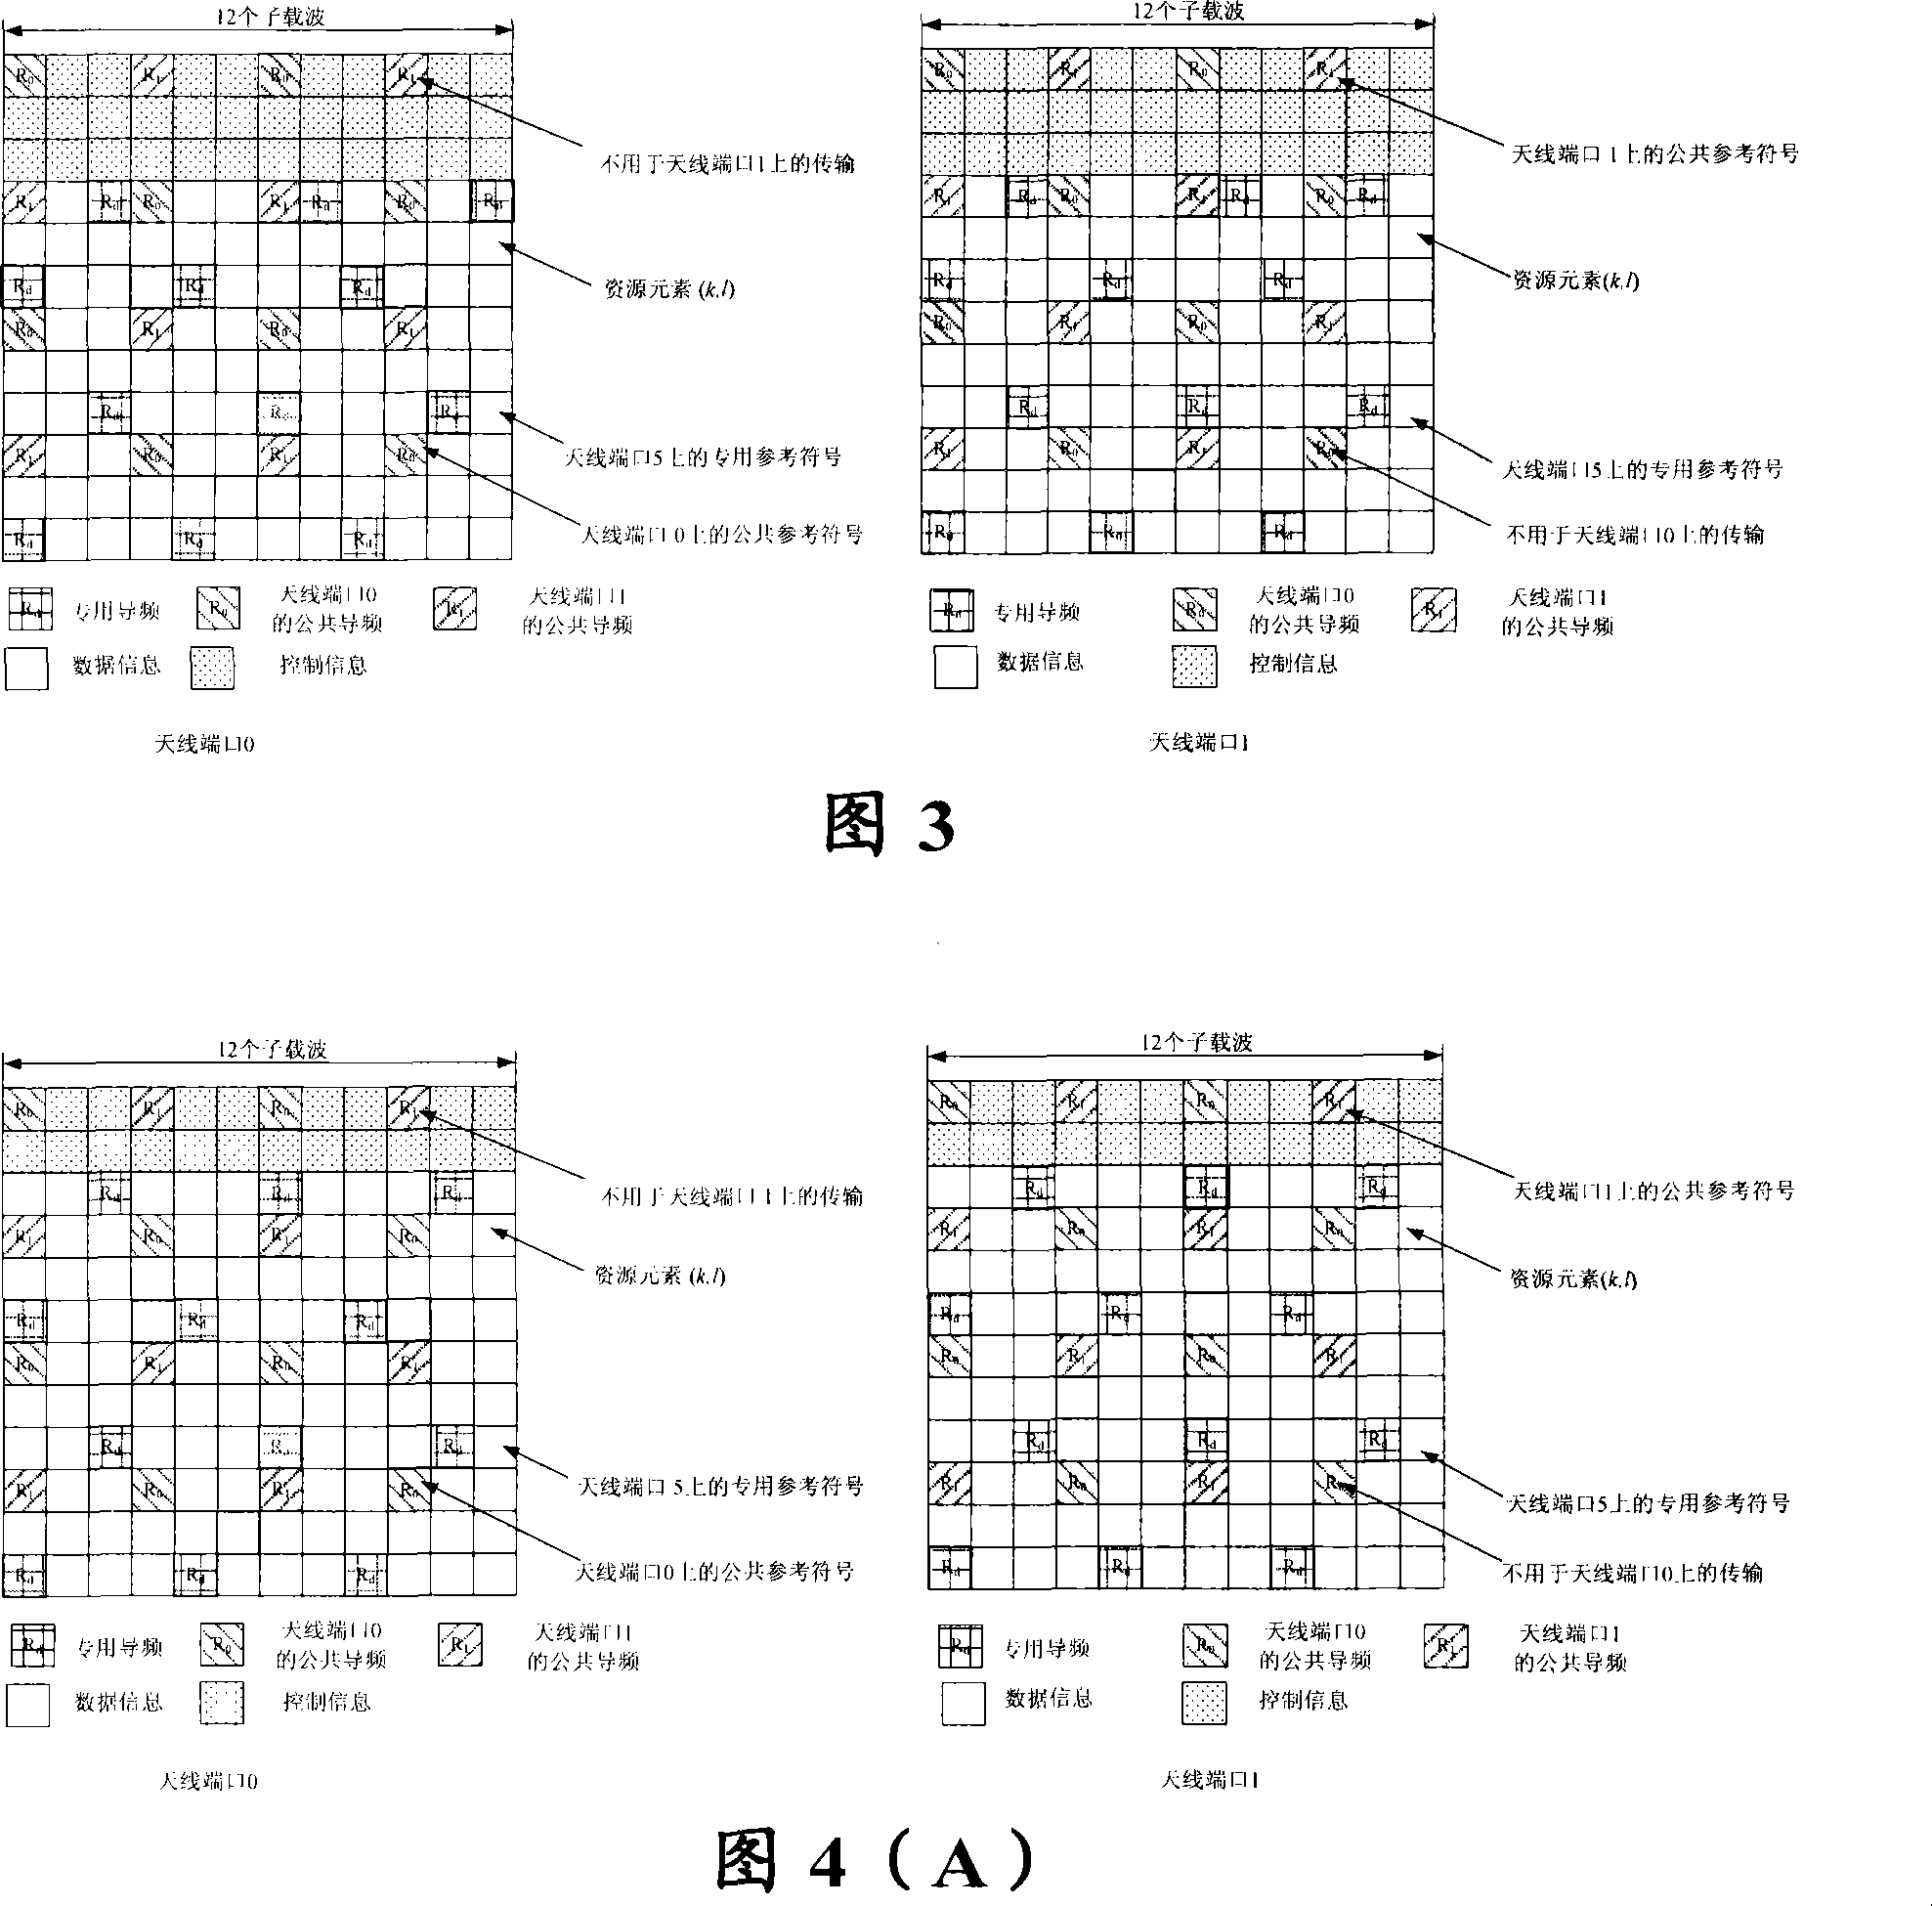 Mapping method for special downlink pilot frequency and physical resource block